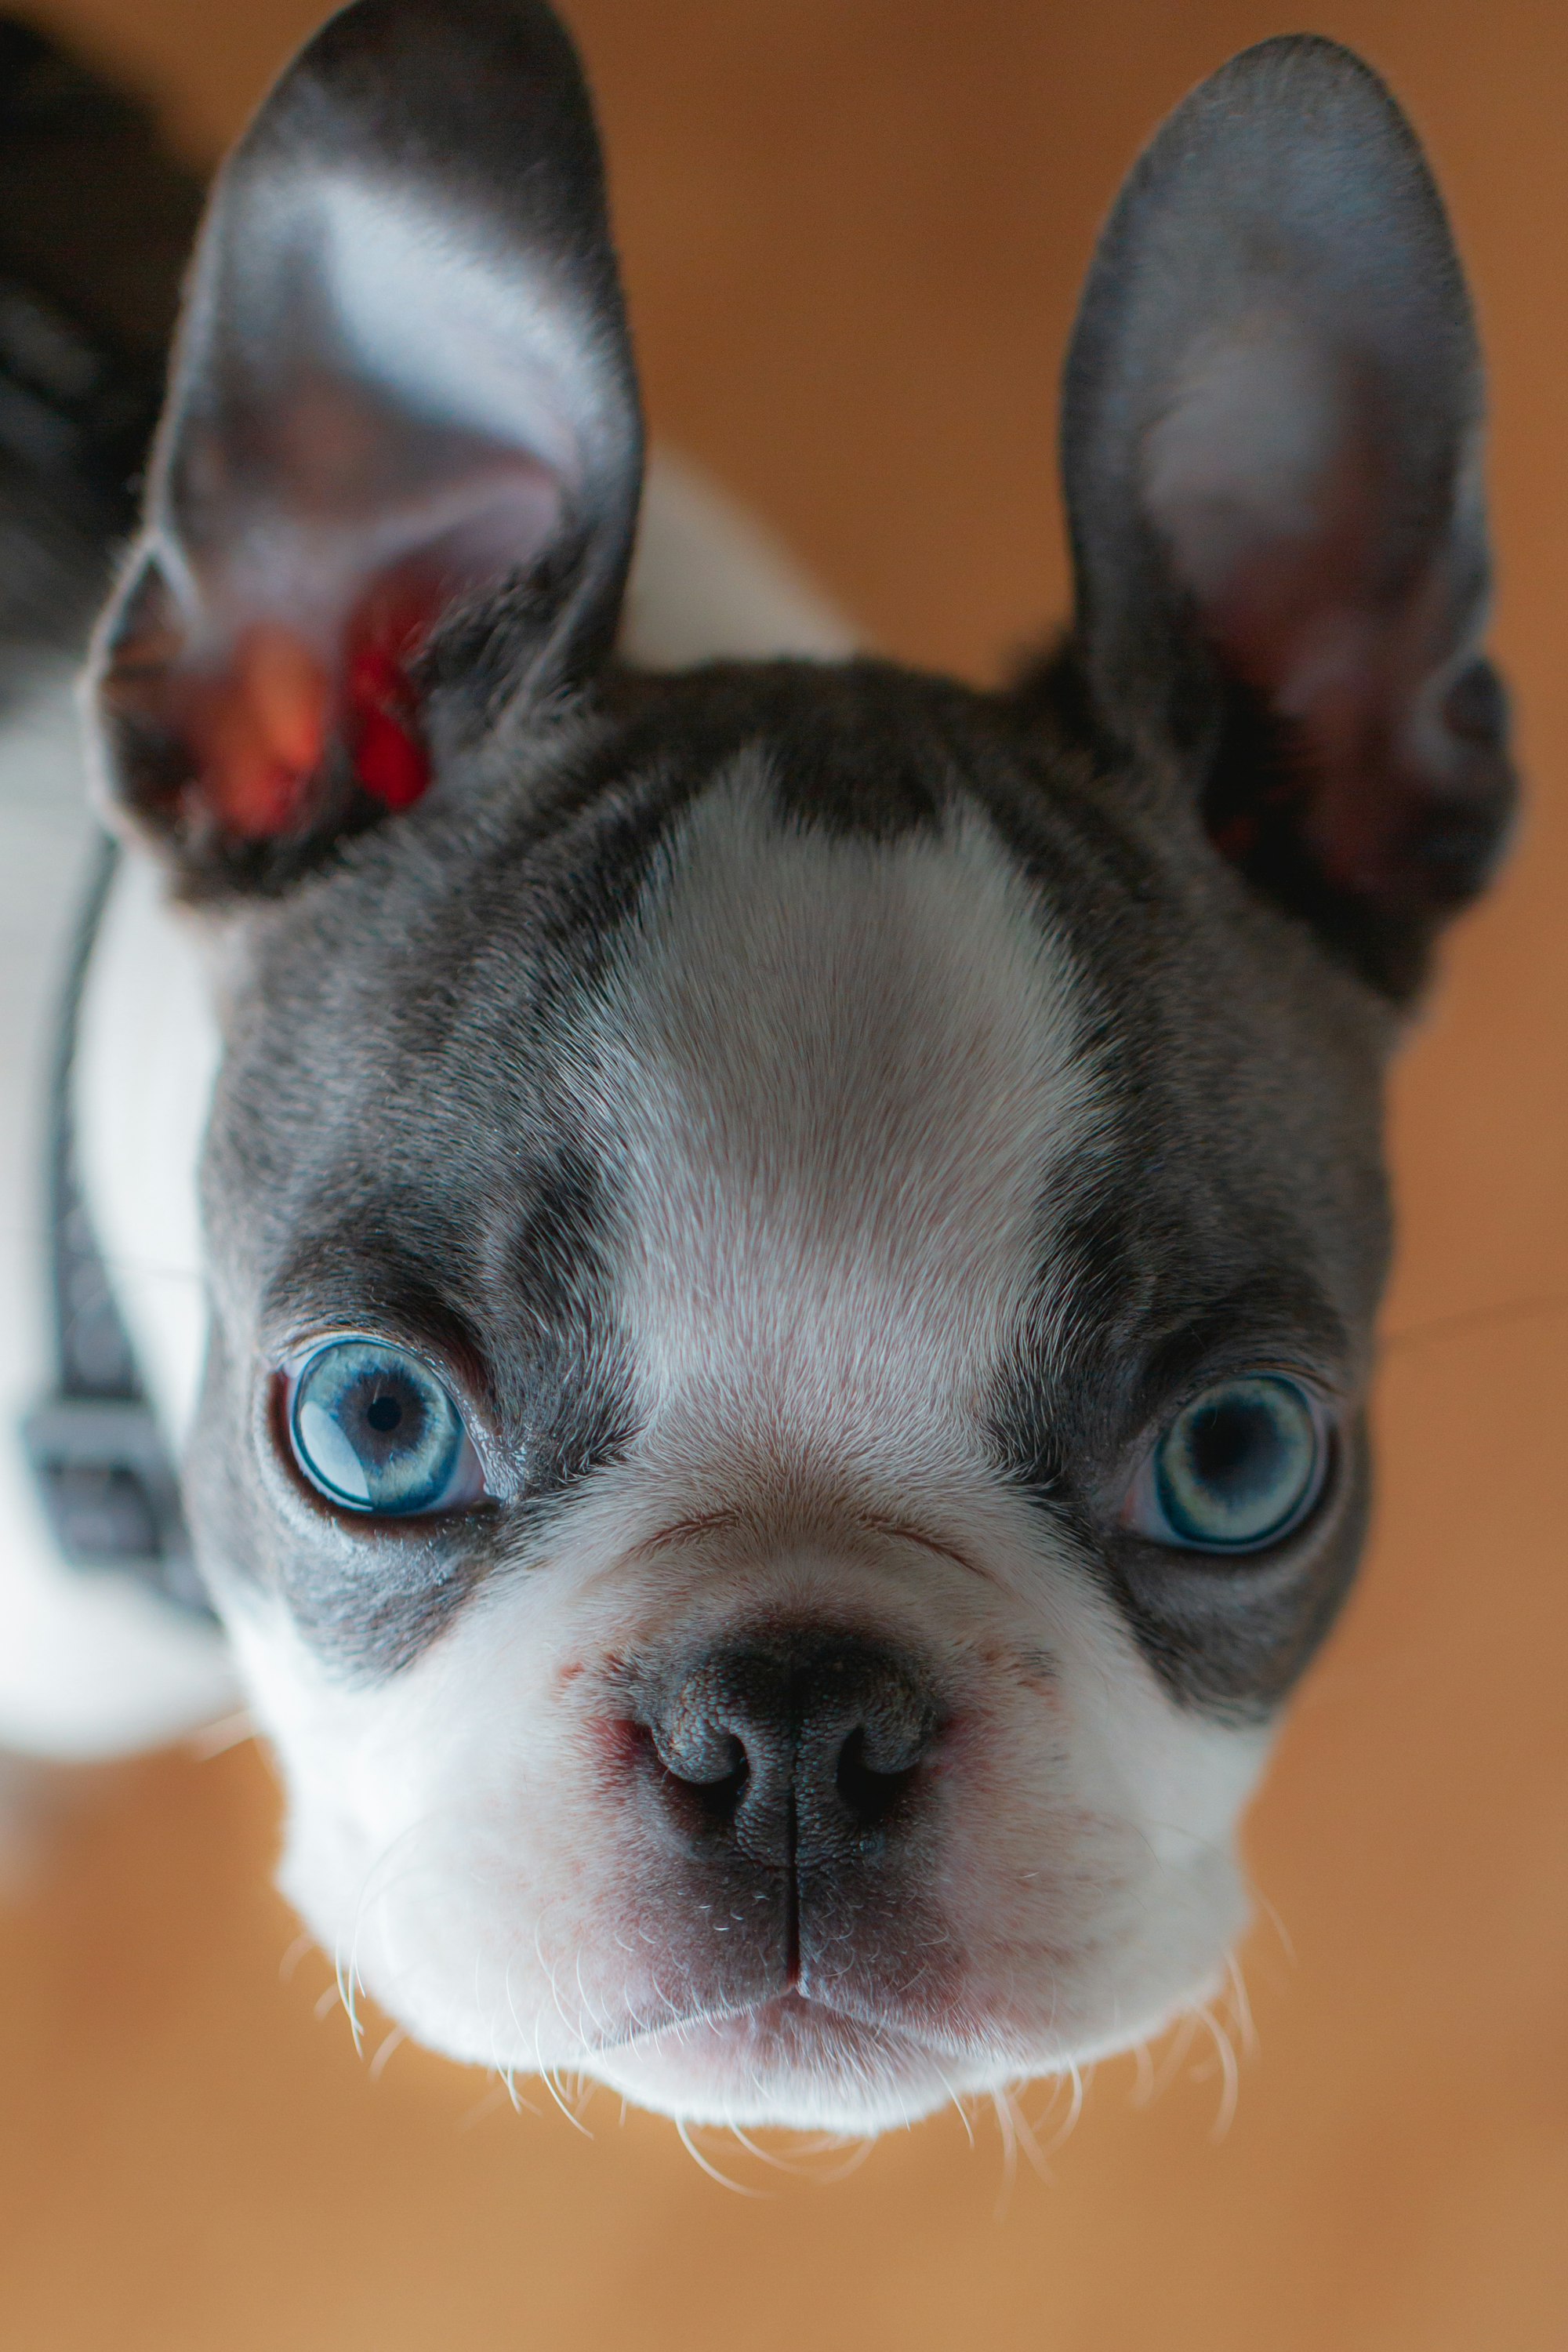 Because my Boston Terrier puppy deserves to be on Unsplash.